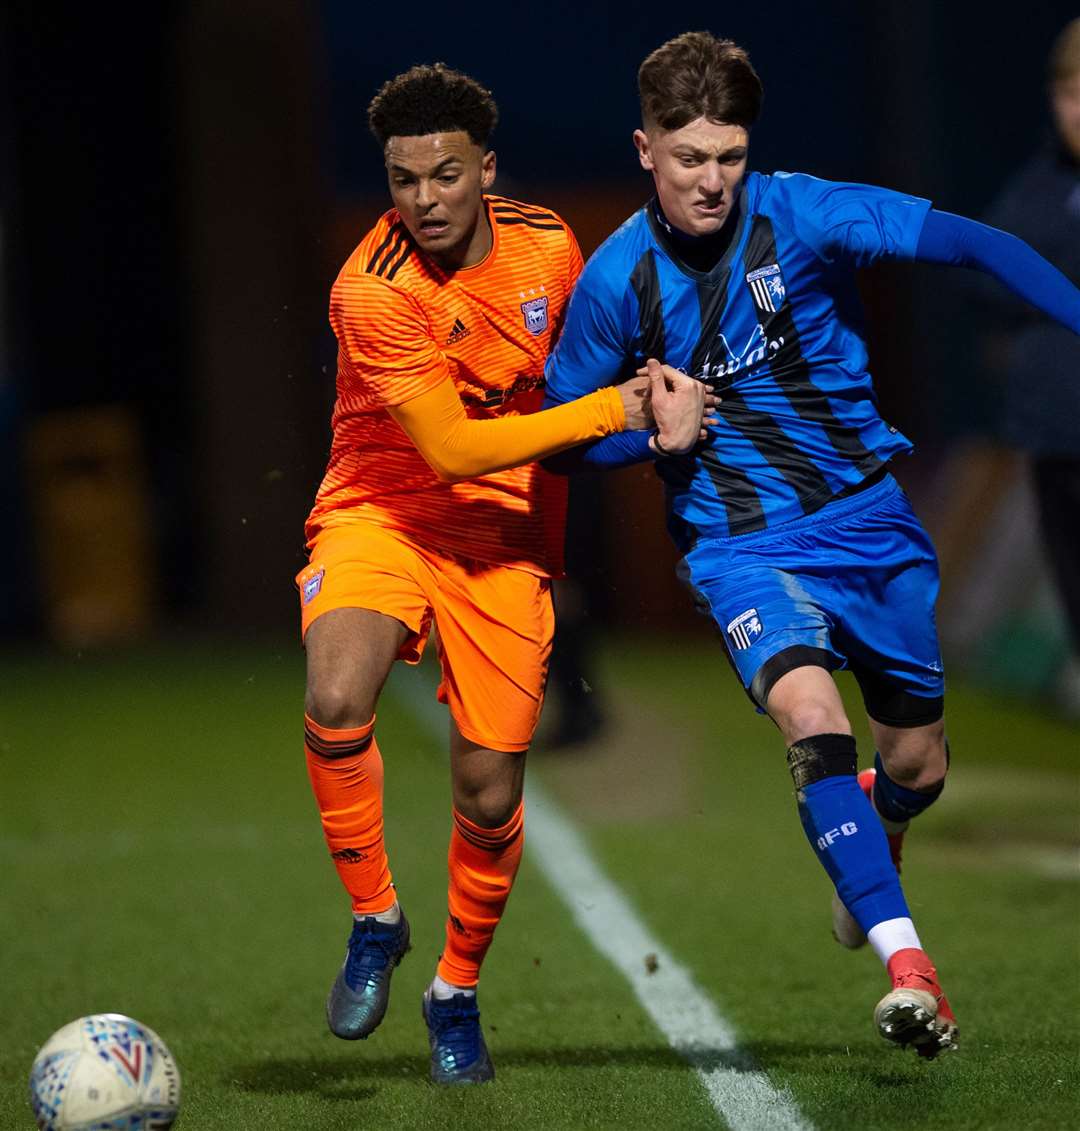 Gillingham vs Ipswich Town, FA Youith Cup 4th round, 11th January 2019..Toby Bancroft is hustled off the ball and the pitch by Dylan Crowe. (38352801)